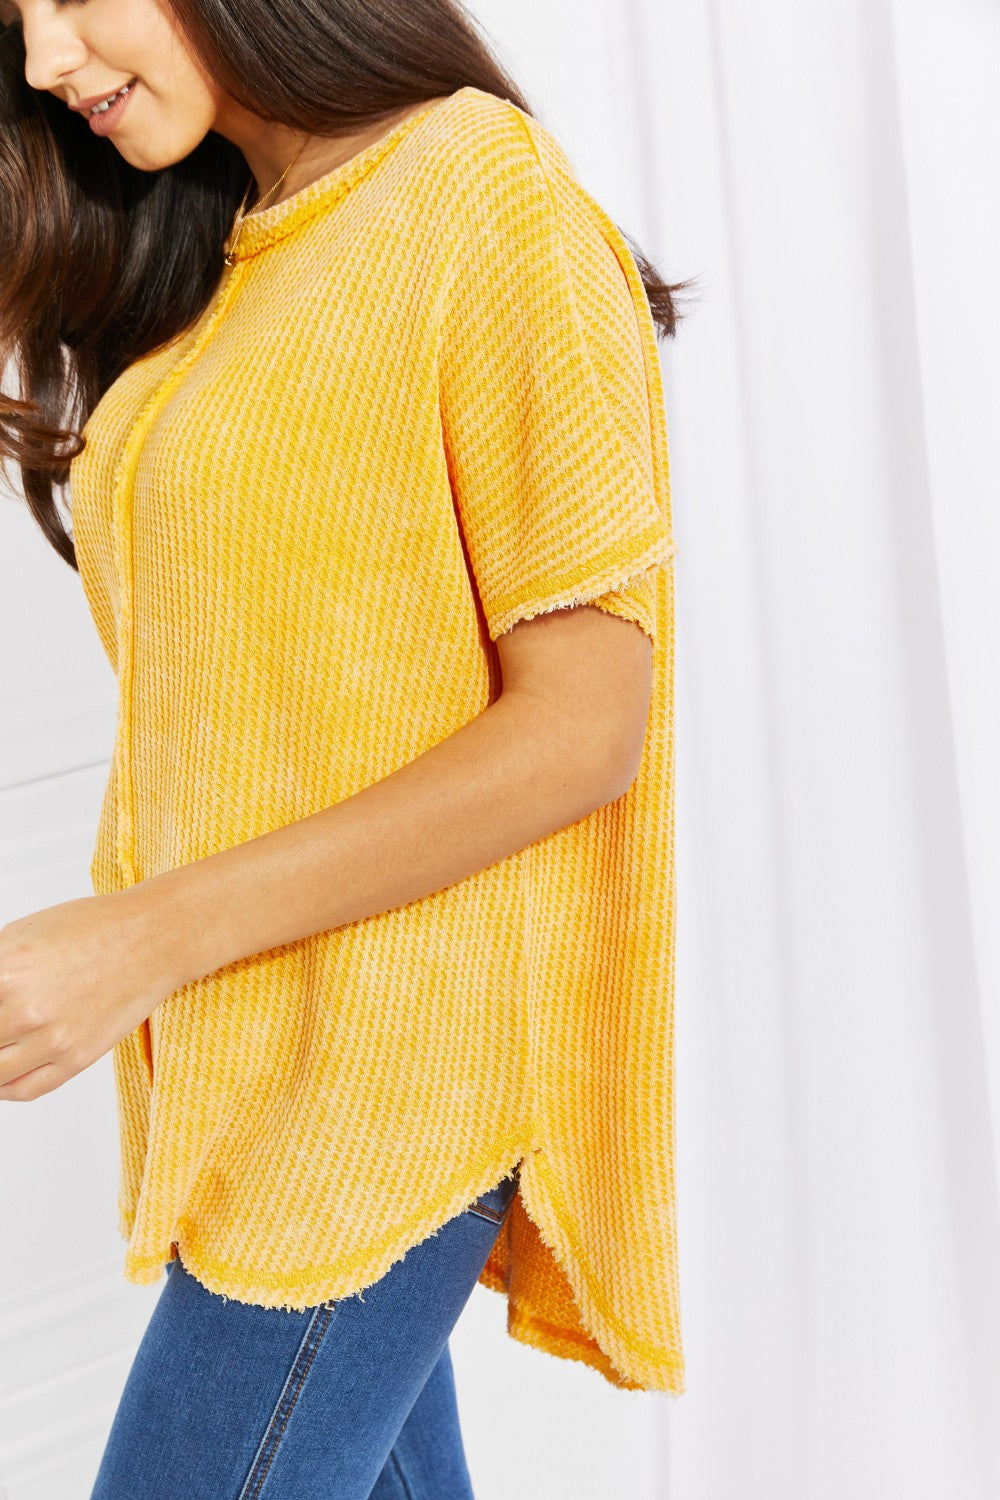 Washed Waffle Knit Top in Yellow Gold - Women’s Clothing & Accessories - Shirts & Tops - 5 - 2024